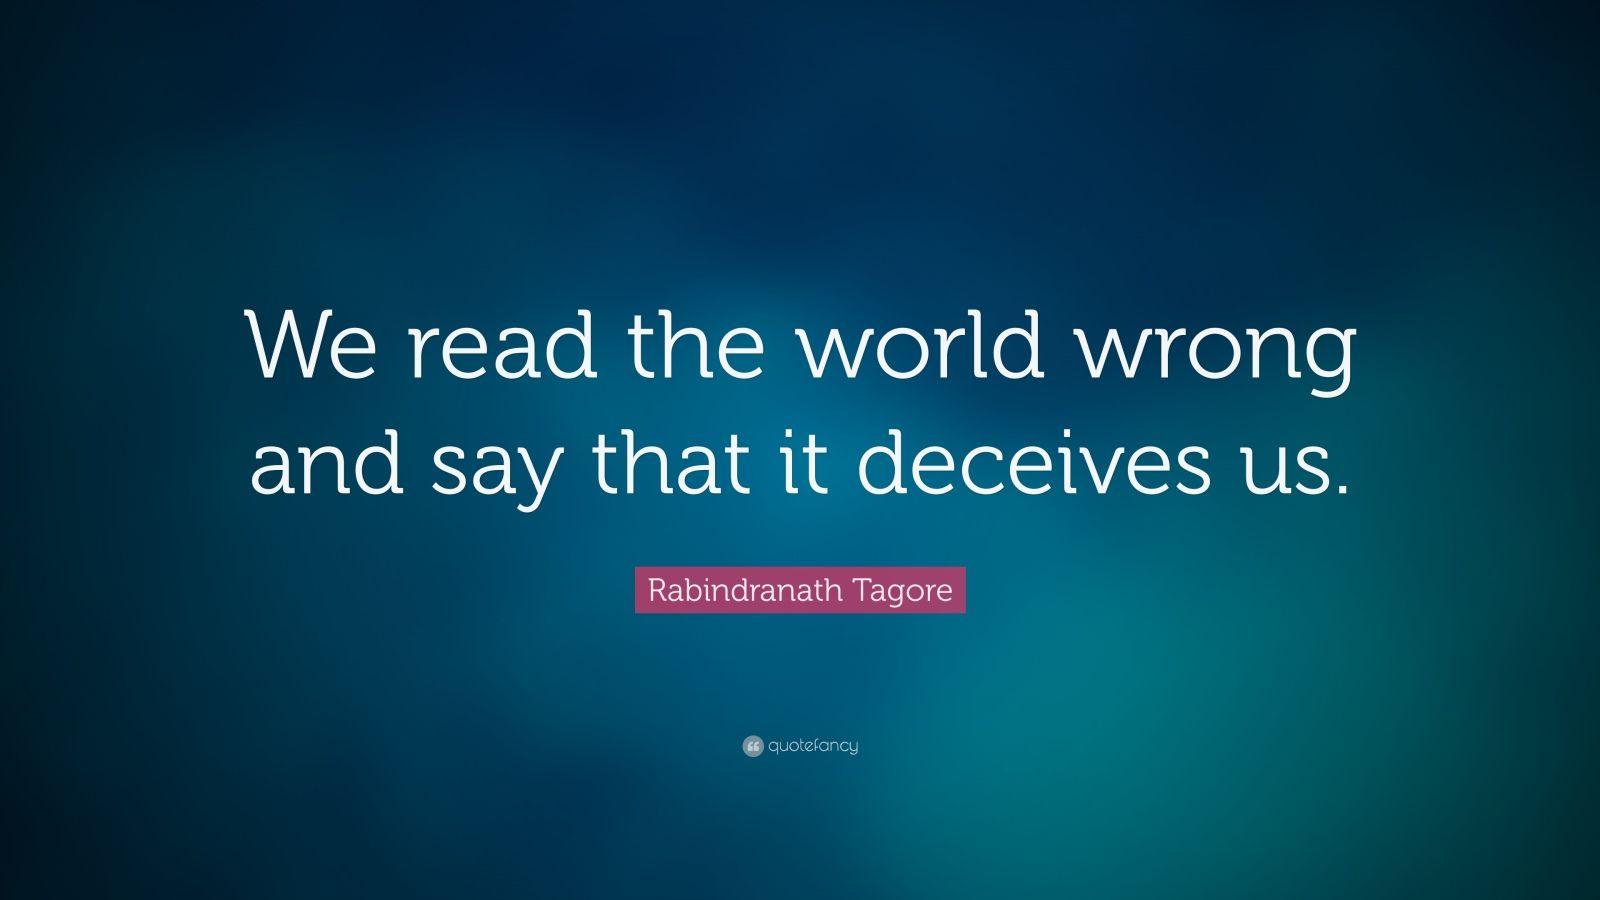 Rabindranath Tagore Quote: “We read the world wrong and say that